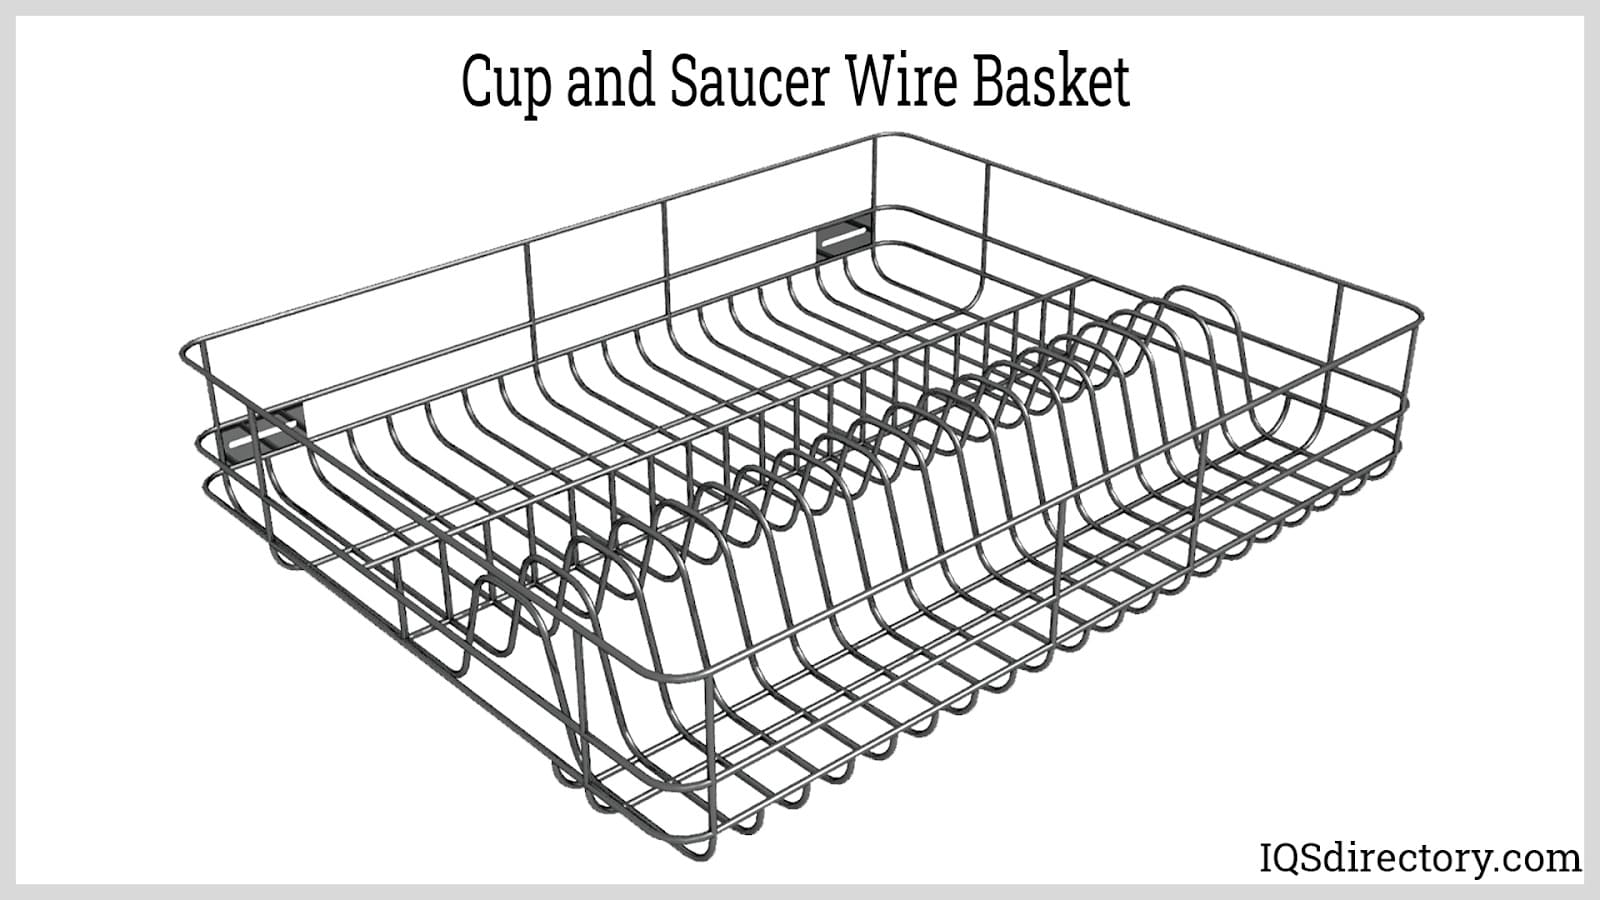 Cup and Saucer Wire Basket